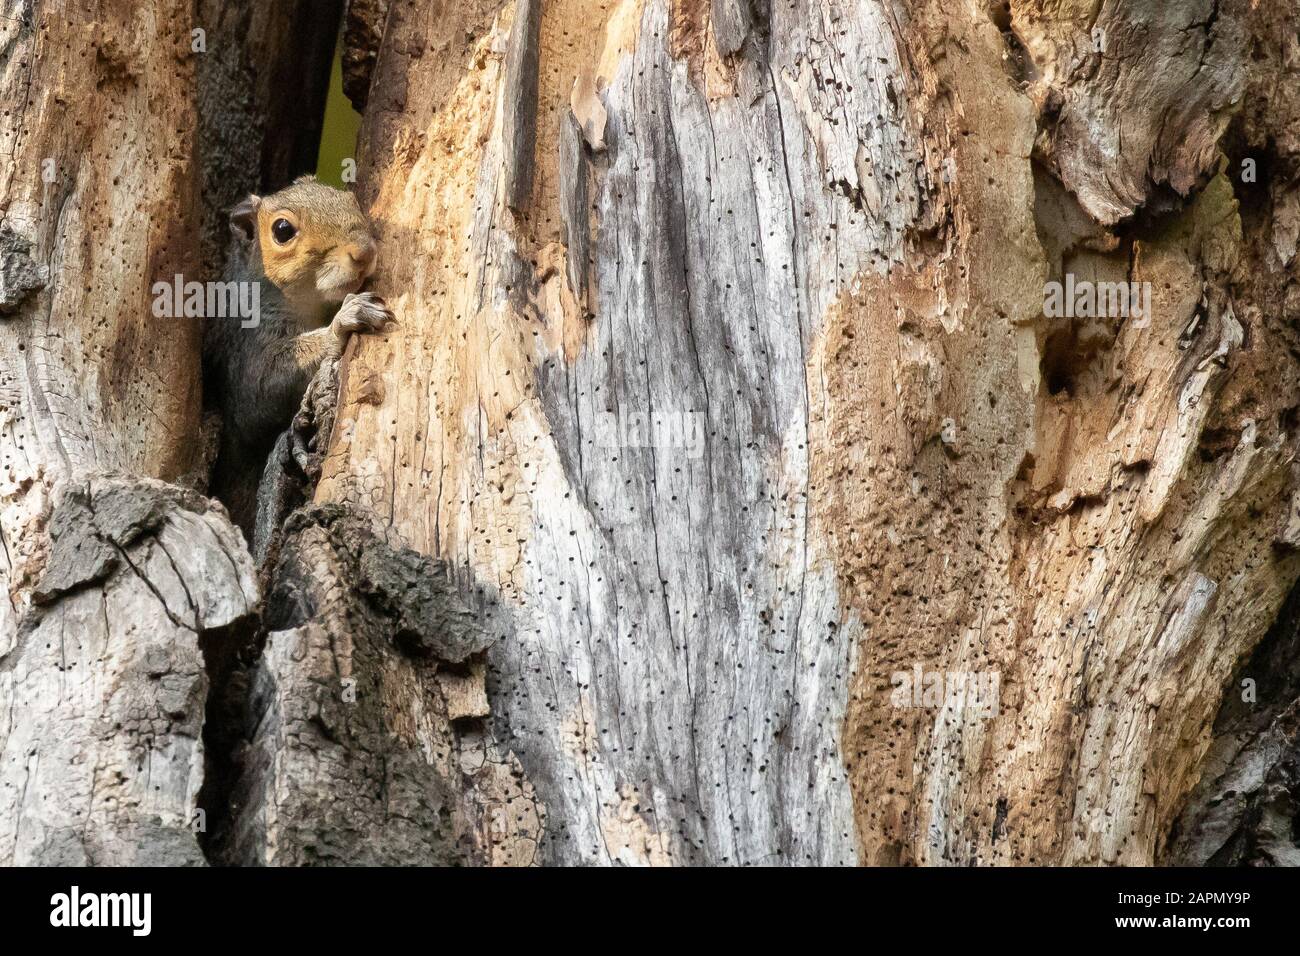 A cautious grey squirrel peeking out from a large rotten tree Stock Photo